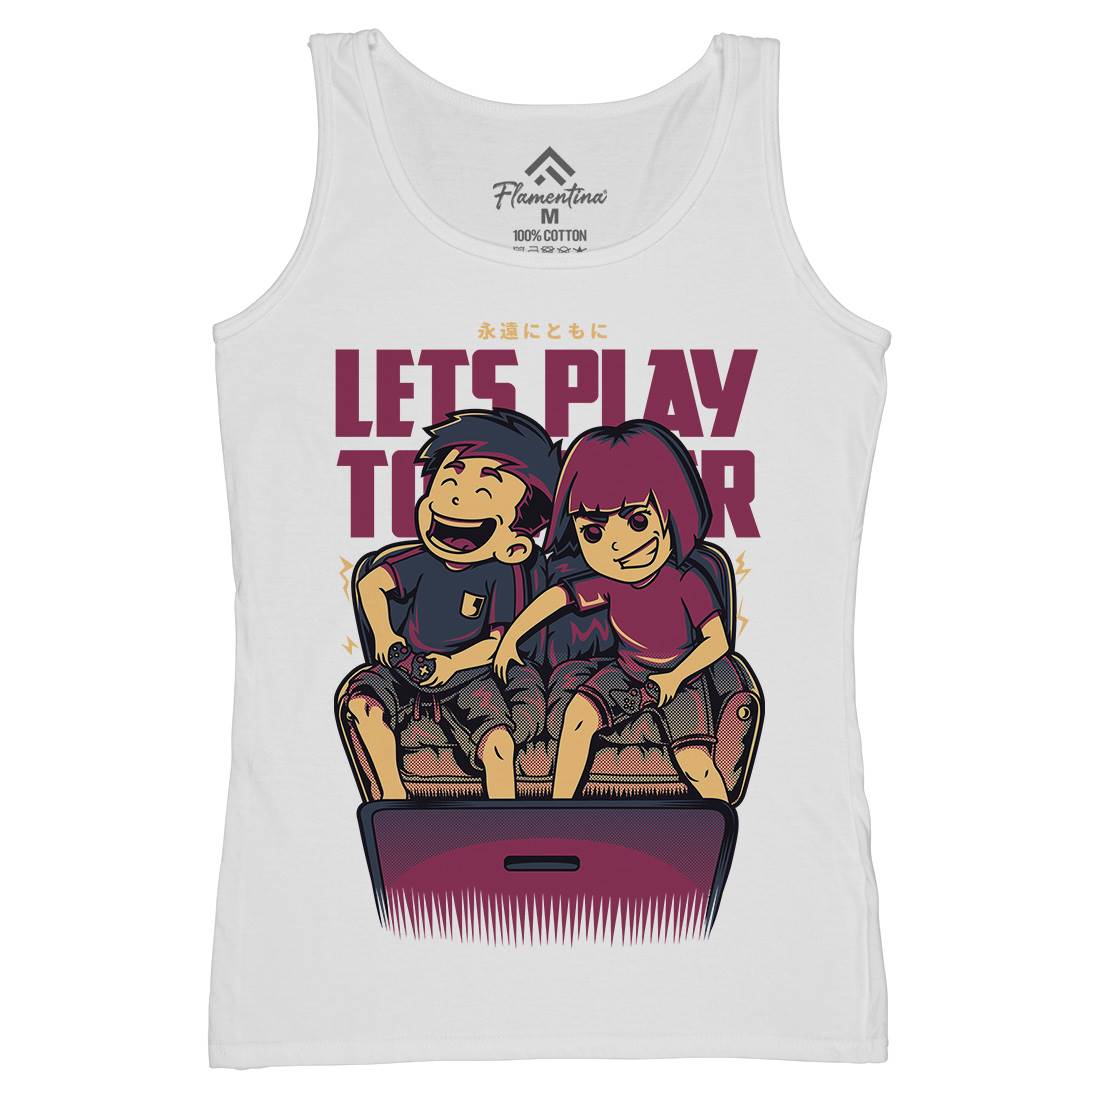 Lets Play Together Womens Organic Tank Top Vest Geek D635